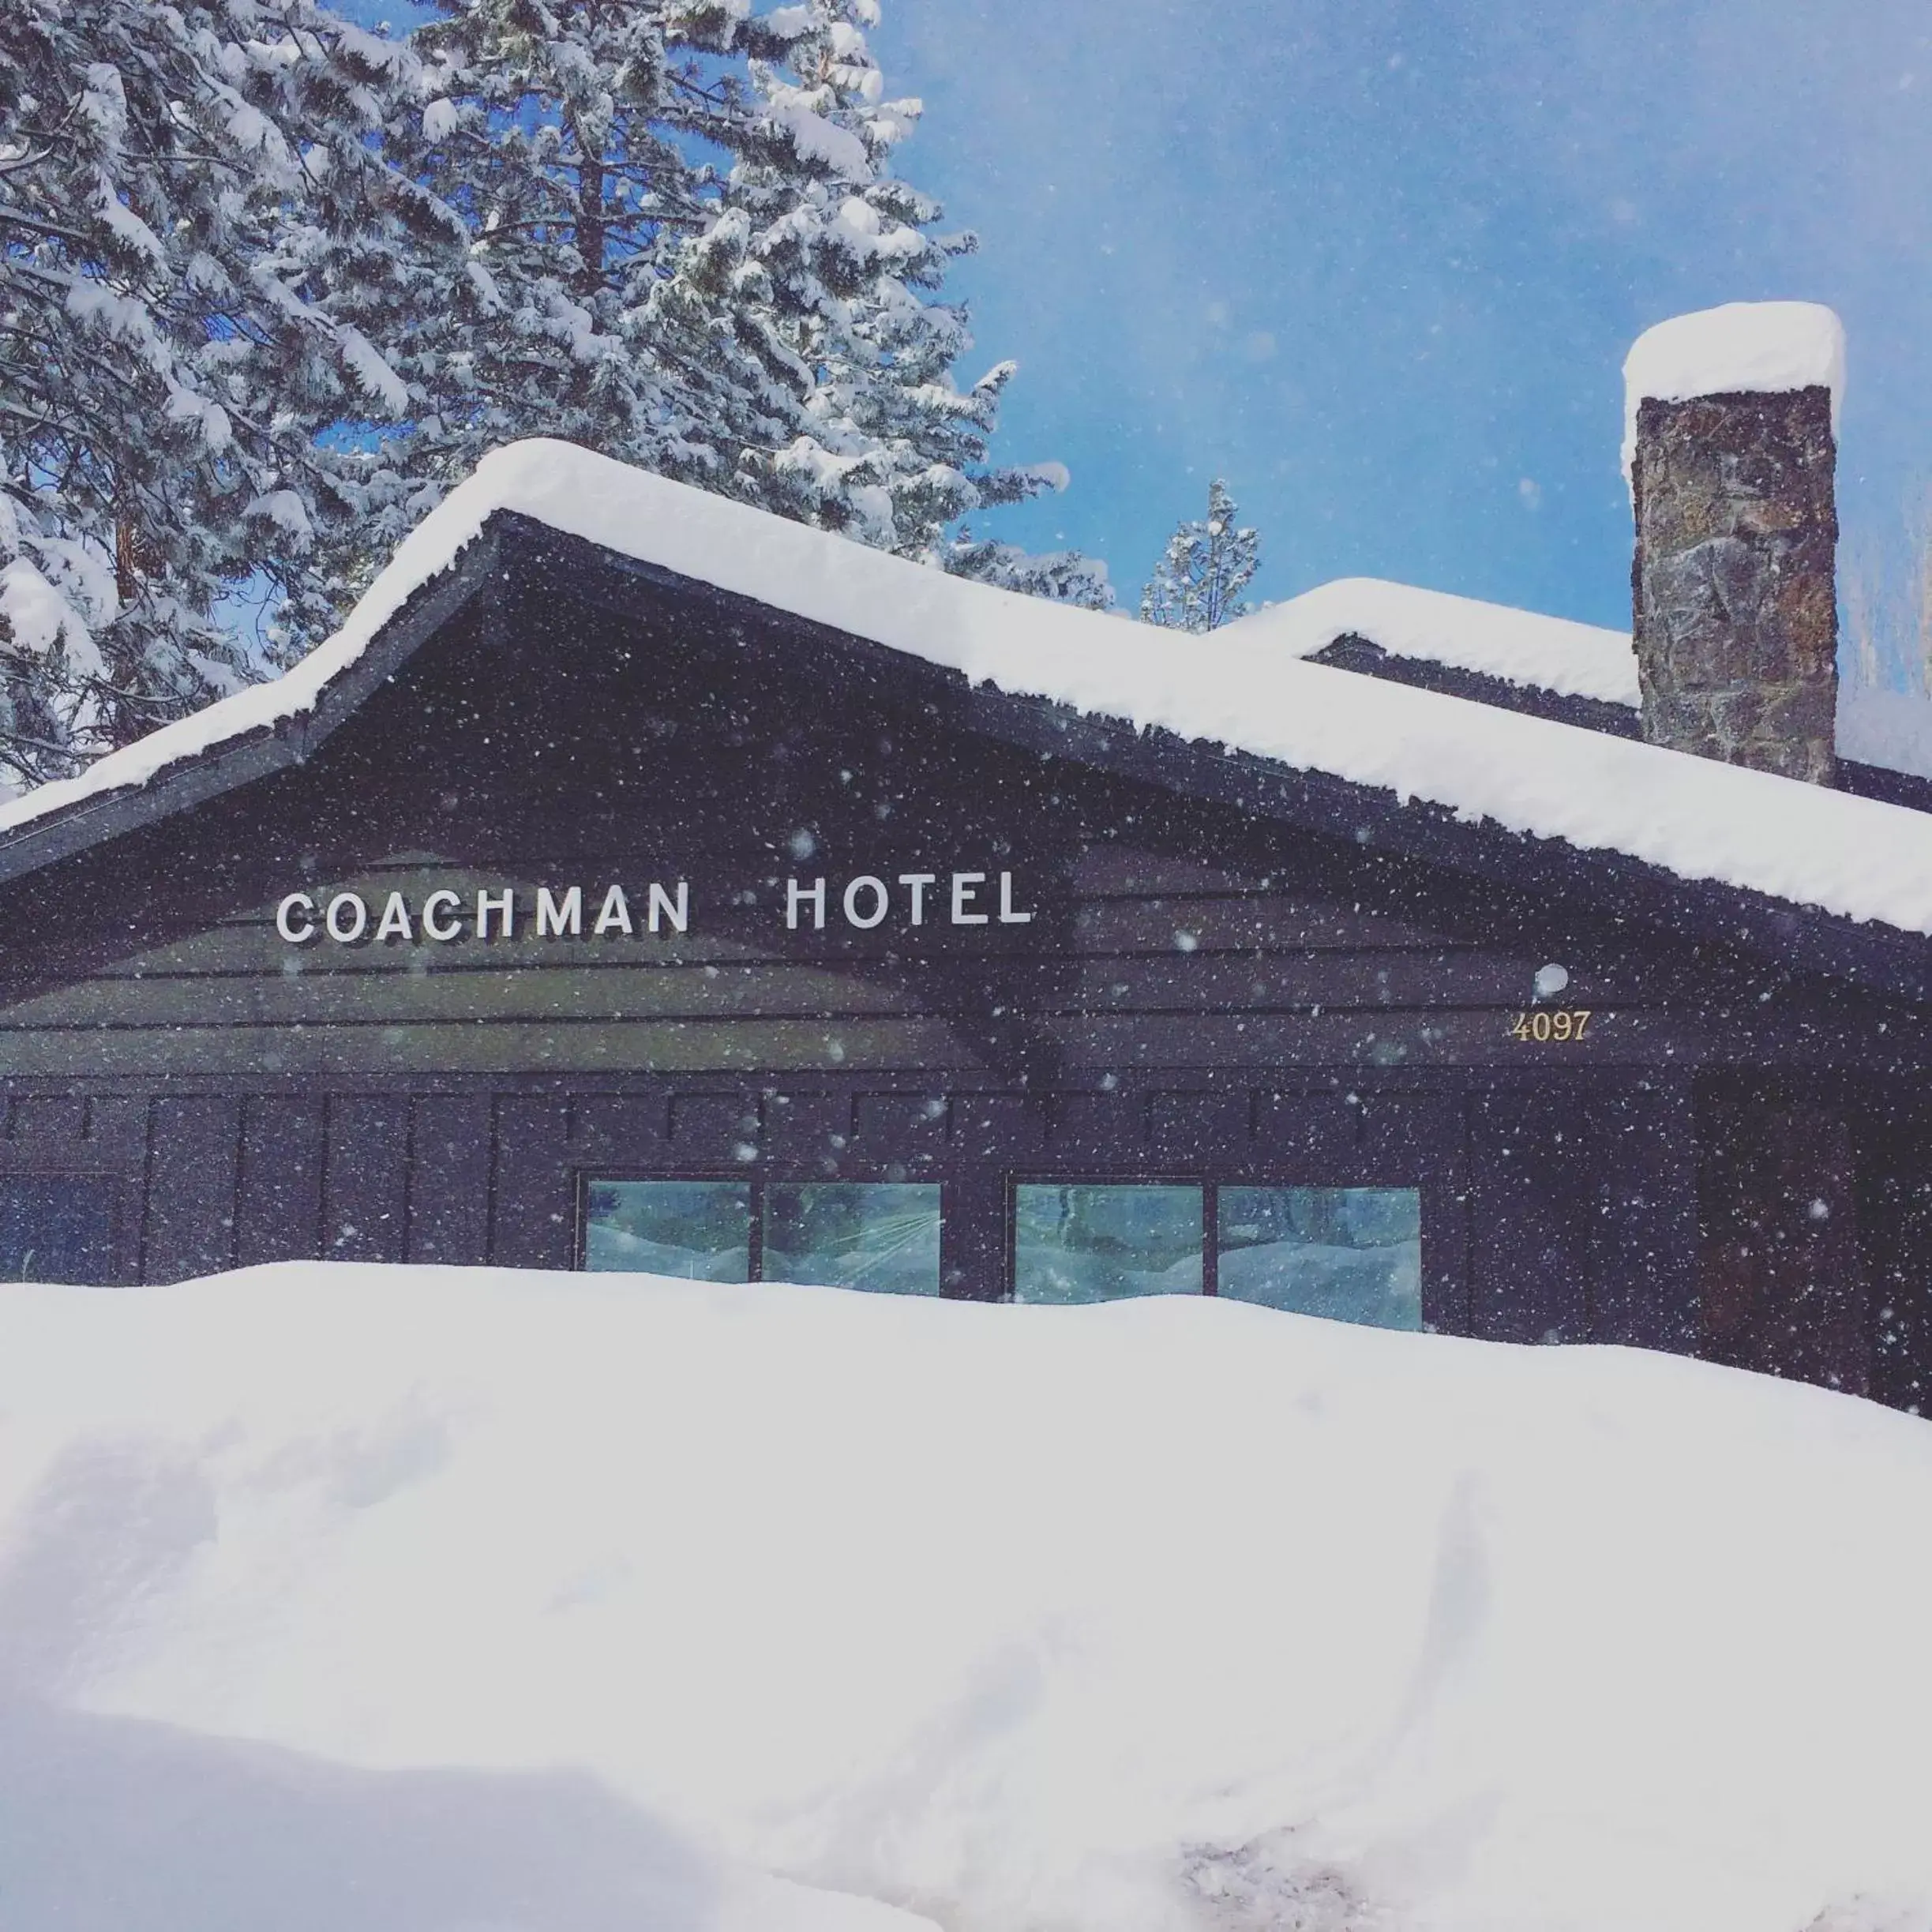 Property building, Winter in The Coachman Hotel